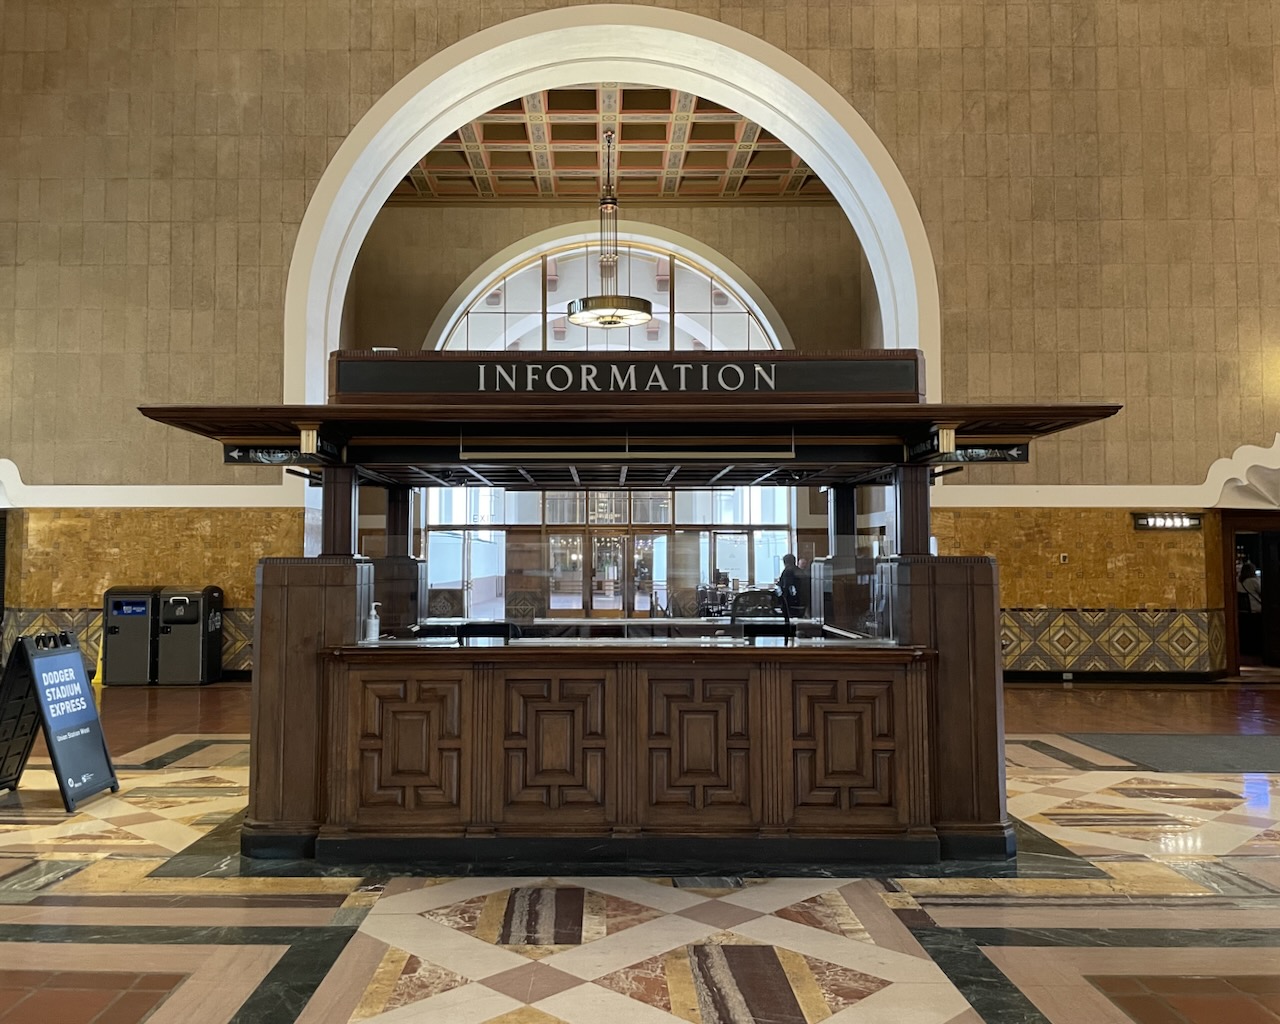 Information booth at Union Statation. The booth is framed by an arched entryway.